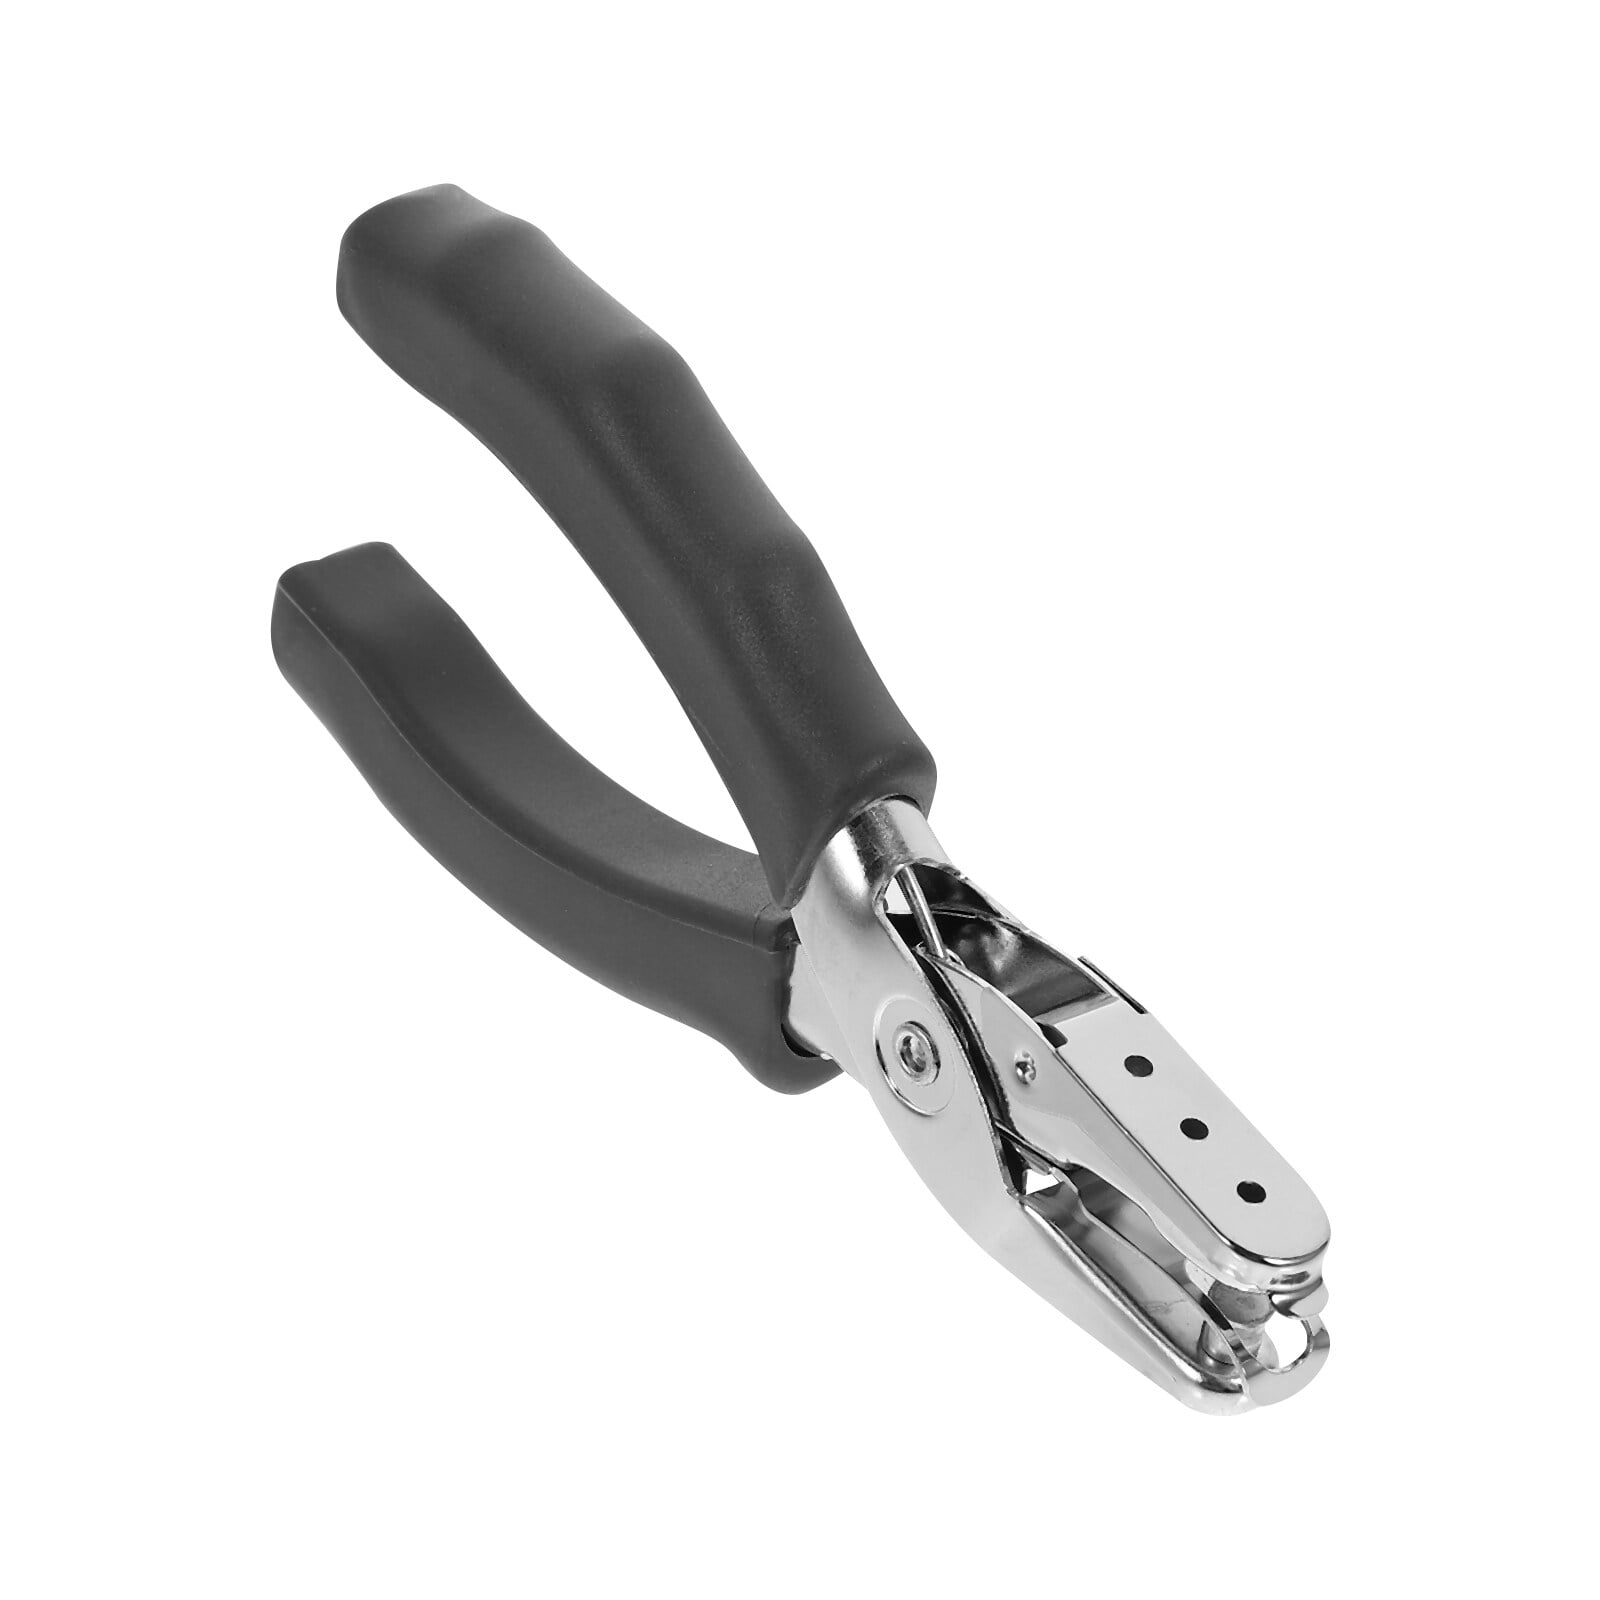 5 Pieces Hole Punch Handheld Hole Paper Punch Small Hole Punch Metal Single  Hole Paper Punch Mini Tiny Hole Punch Hole Punch Shapes Small Hole Puncher